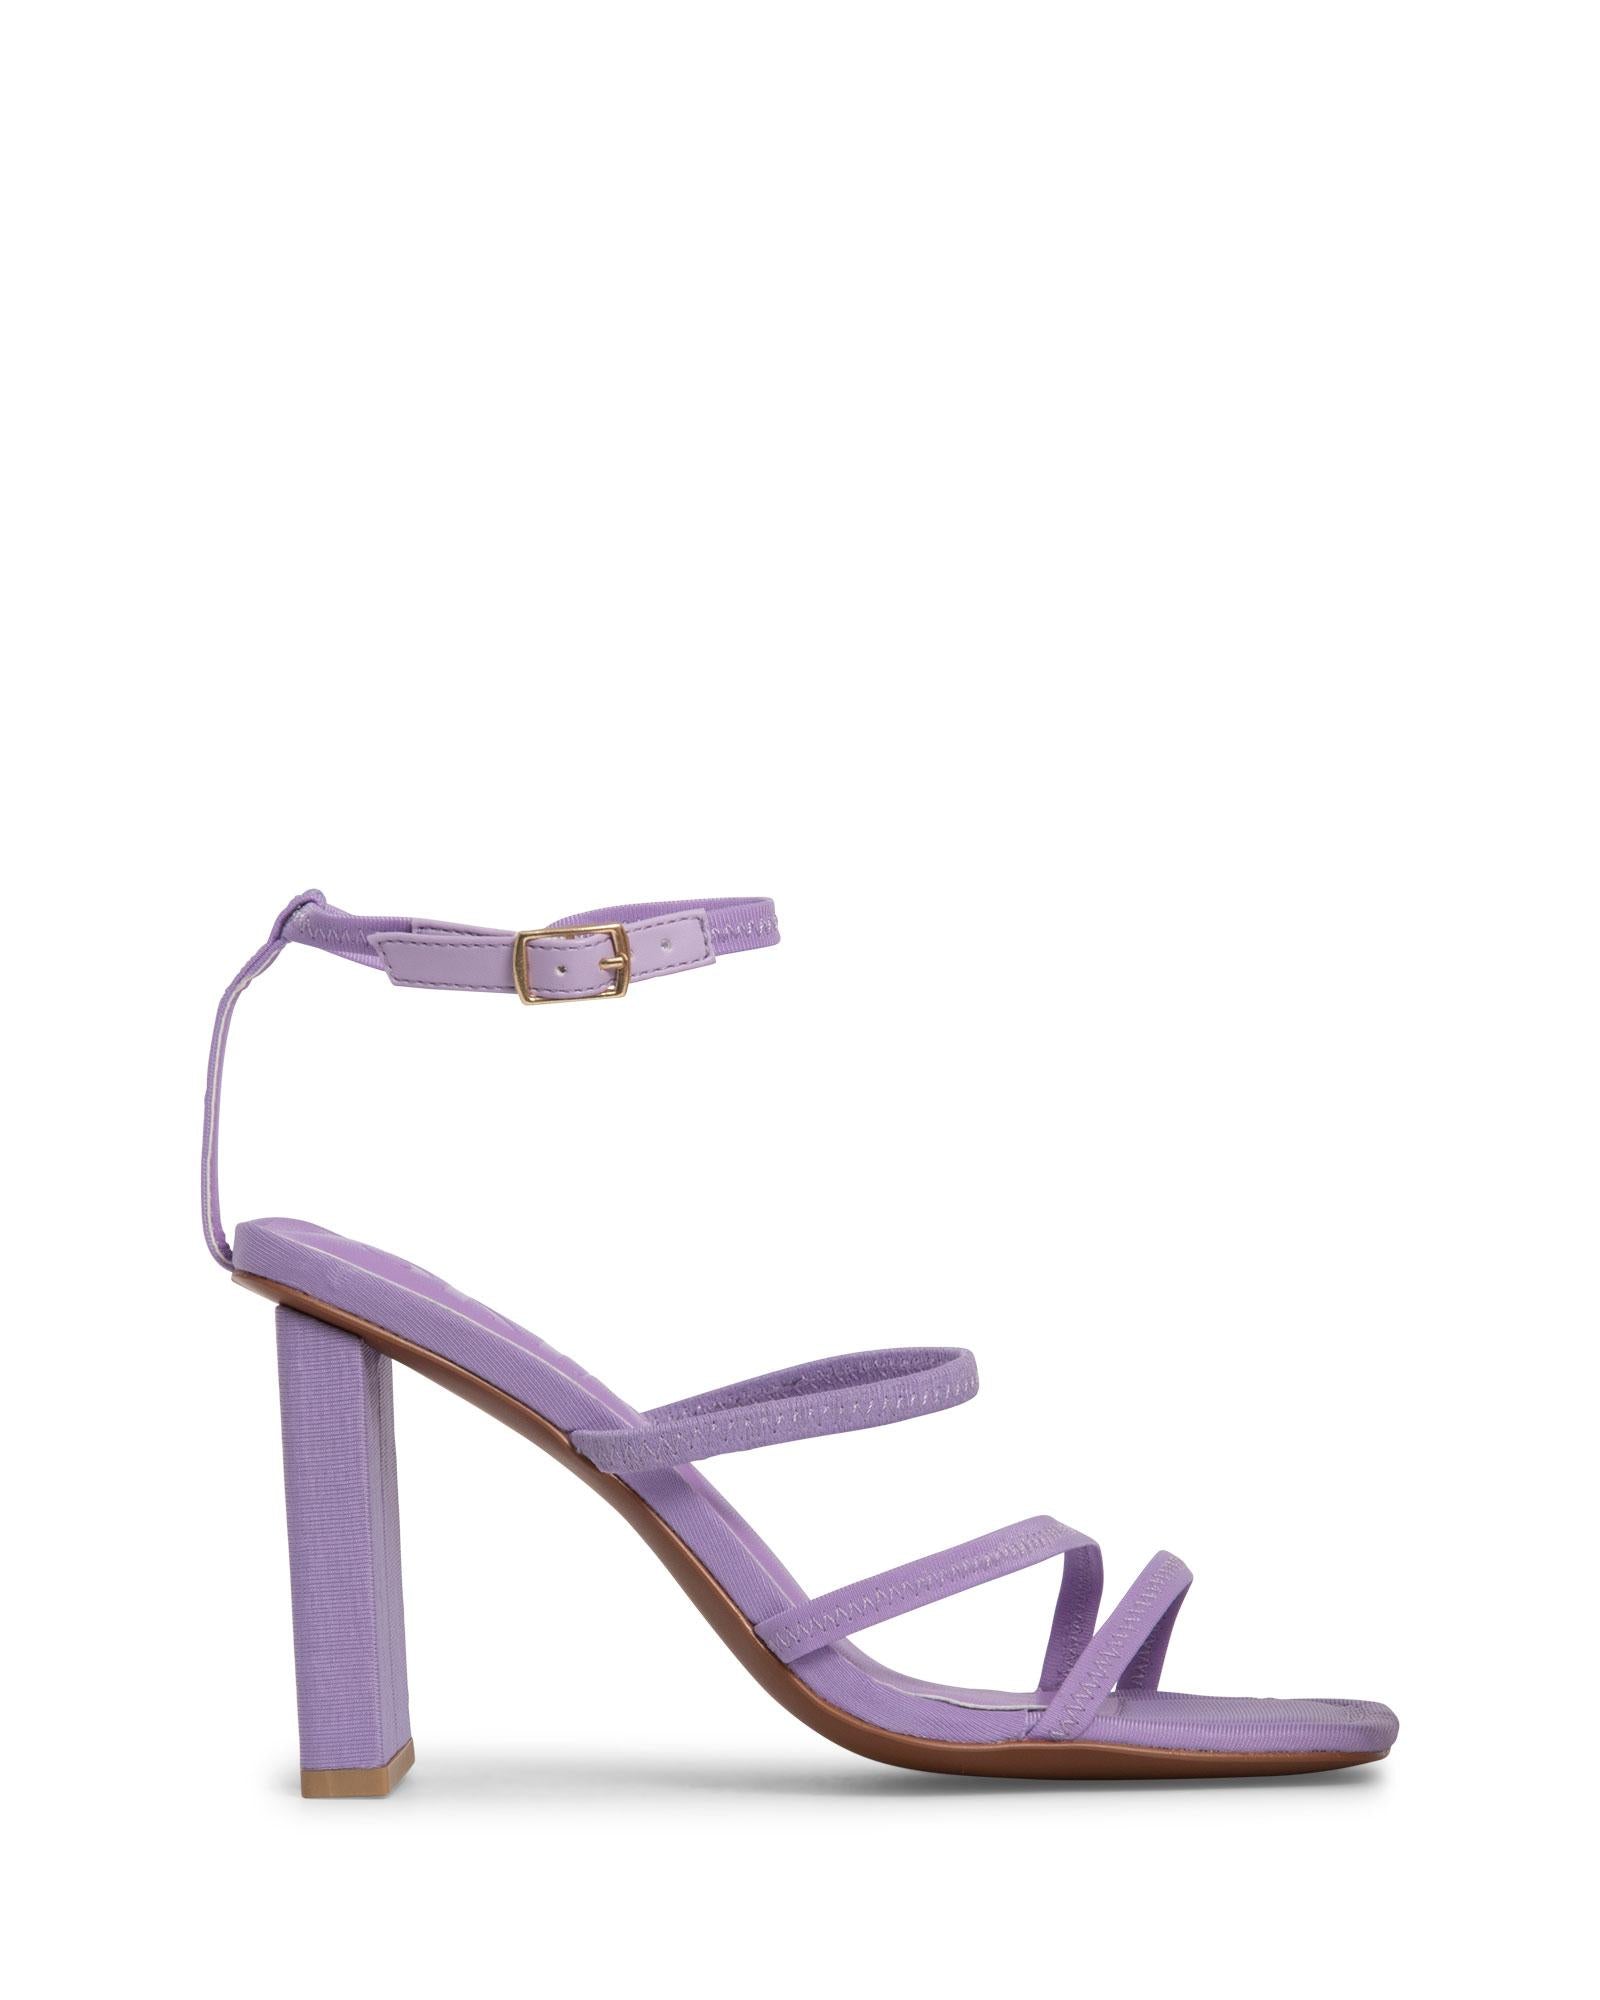 Cabo Lilac 9.5cm Block Heel with Four Fine Straps and a Delicate Gold Buckle.